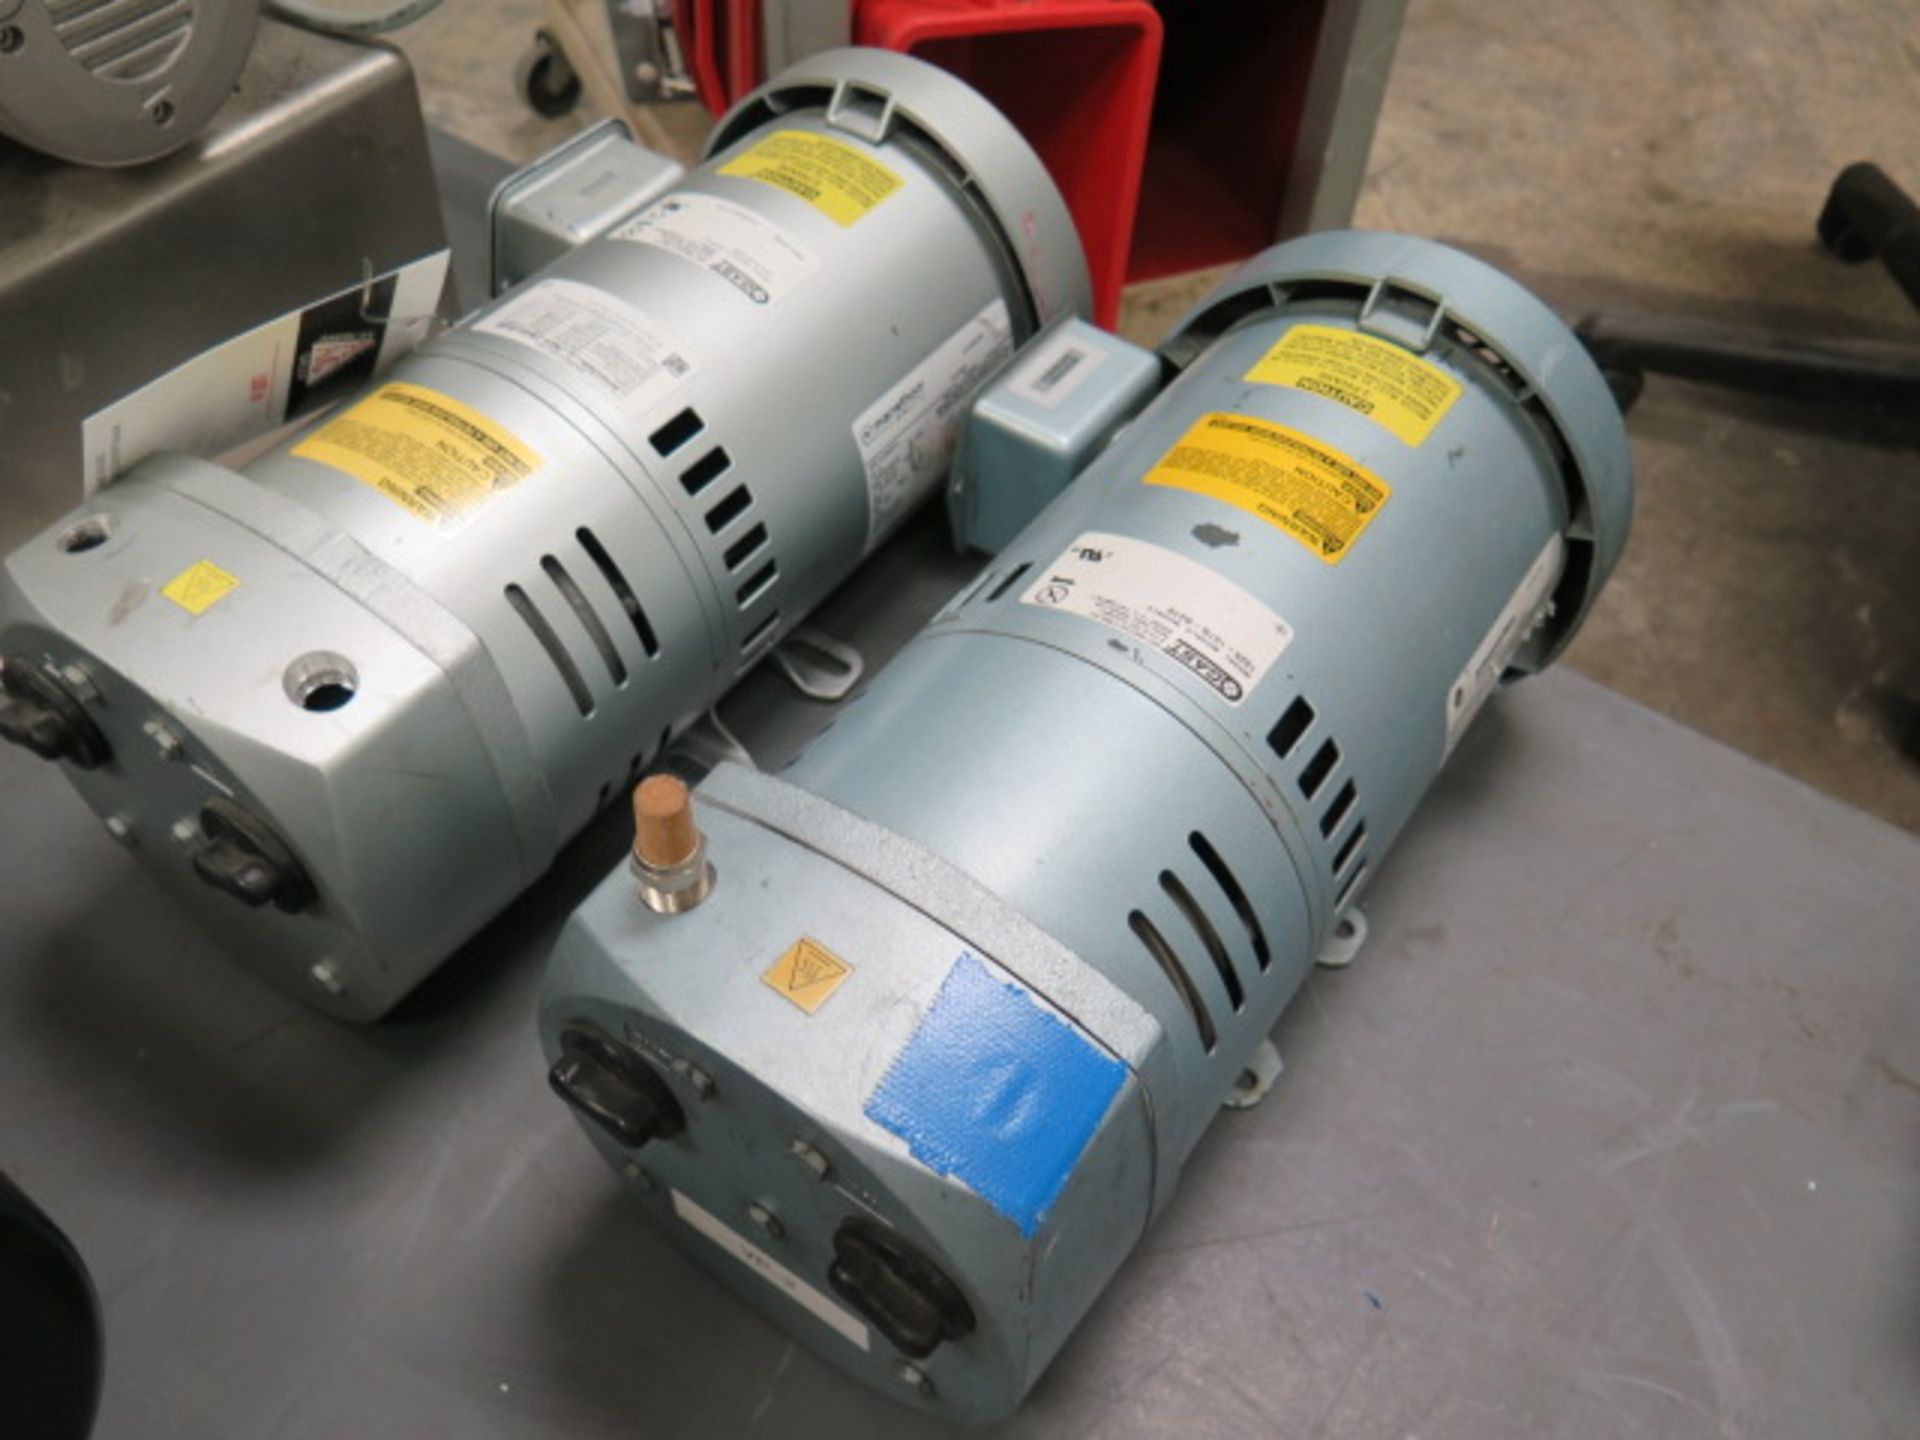 Gast mdl. 1023-101Q-G279 Vacuum Pumps (2) 3/4Hp 208-230/380-460V (SOLD AS-IS - NO WARRANTY) - Image 2 of 5